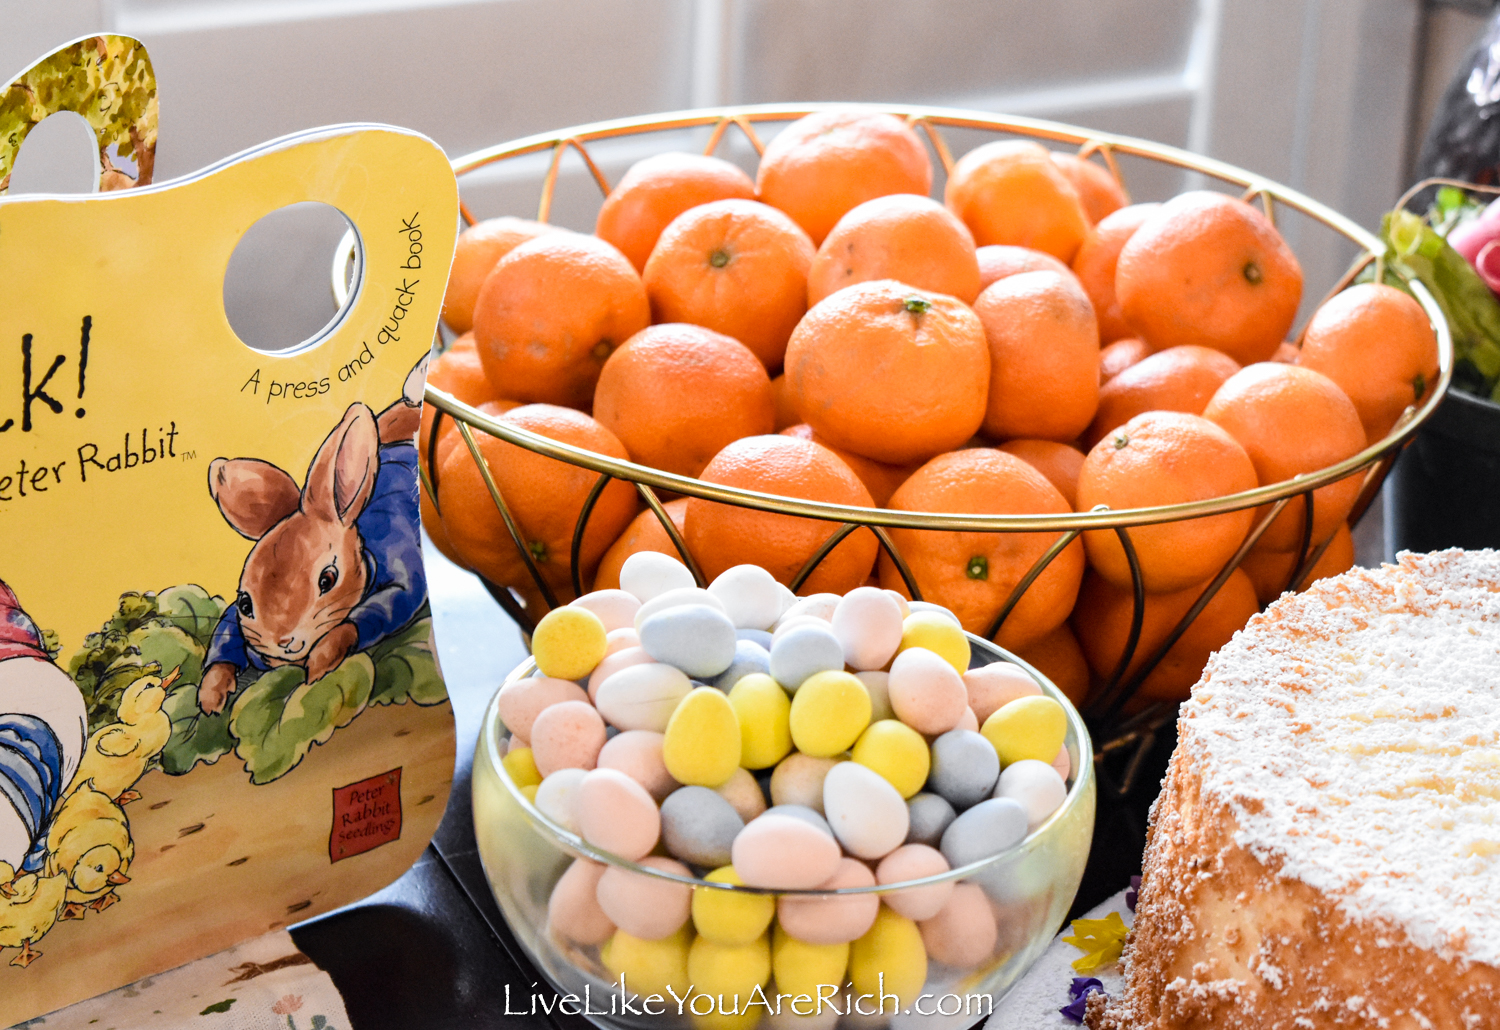 Peter Rabbit Easter Party Is Full of Sweet Garden-Themed Treats